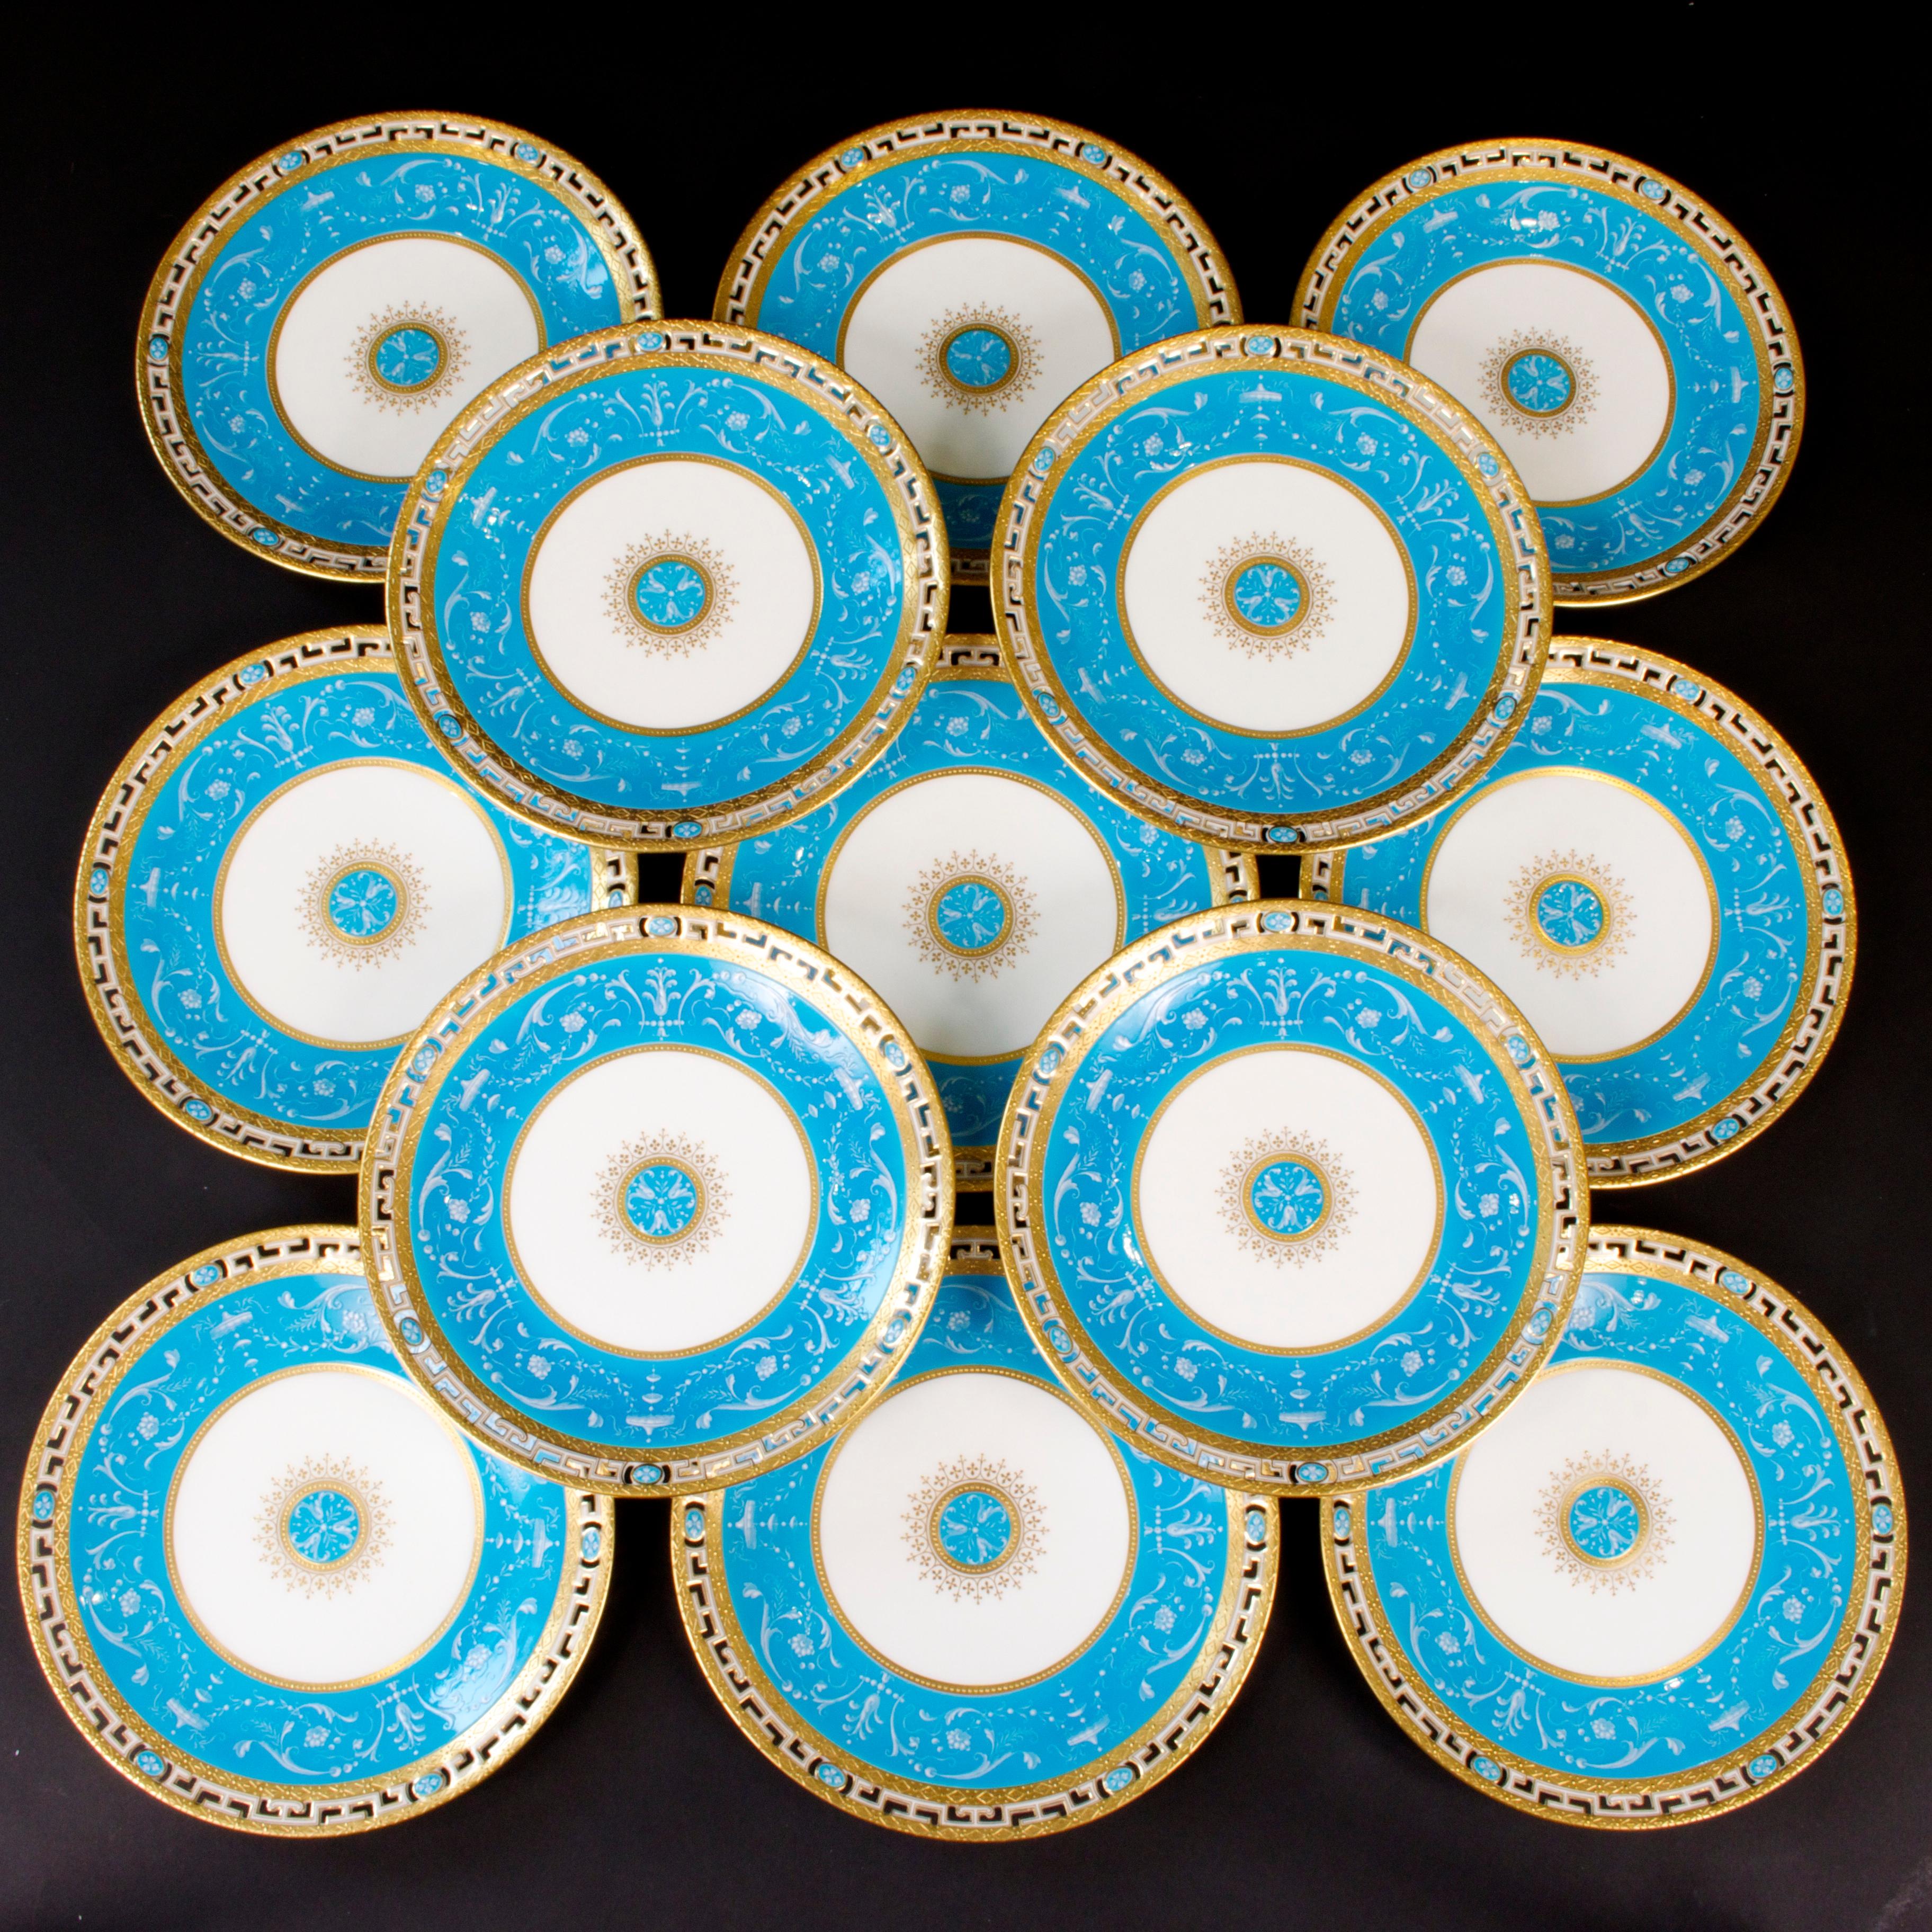 13 Antique Minton Bleu Celeste Plates In Excellent Condition For Sale In New York, NY